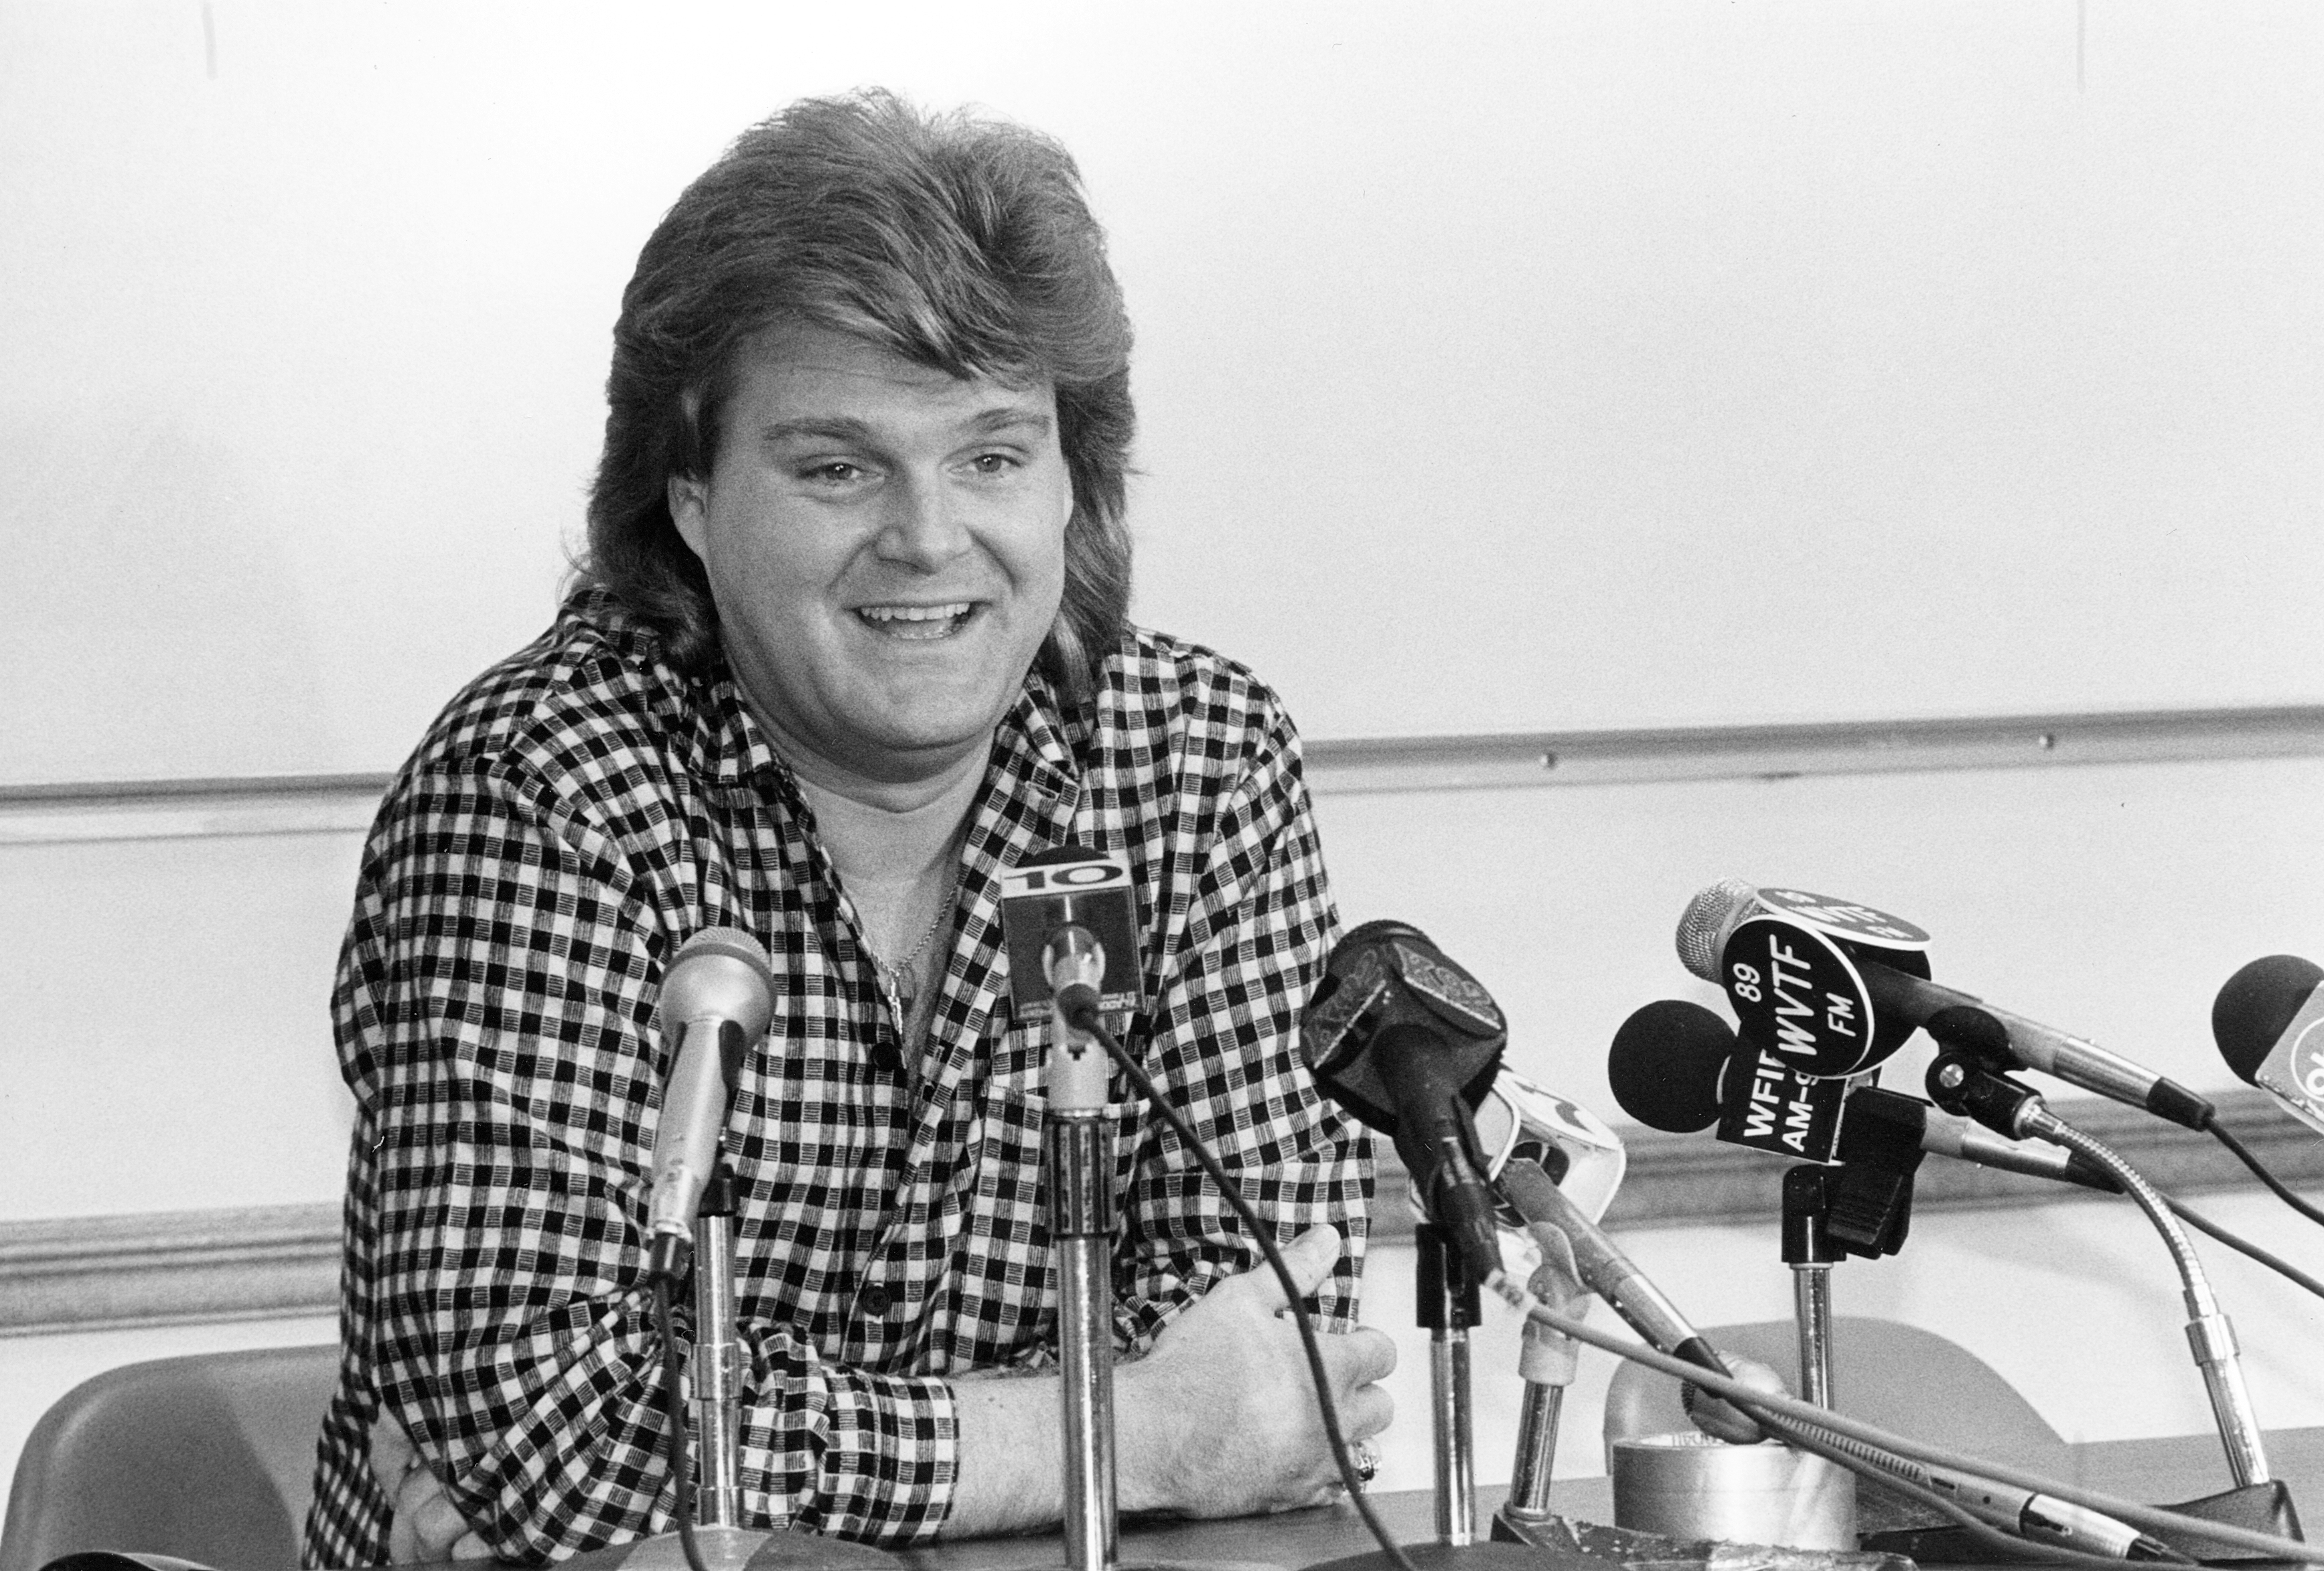 Ricky Skaggs at a press conference